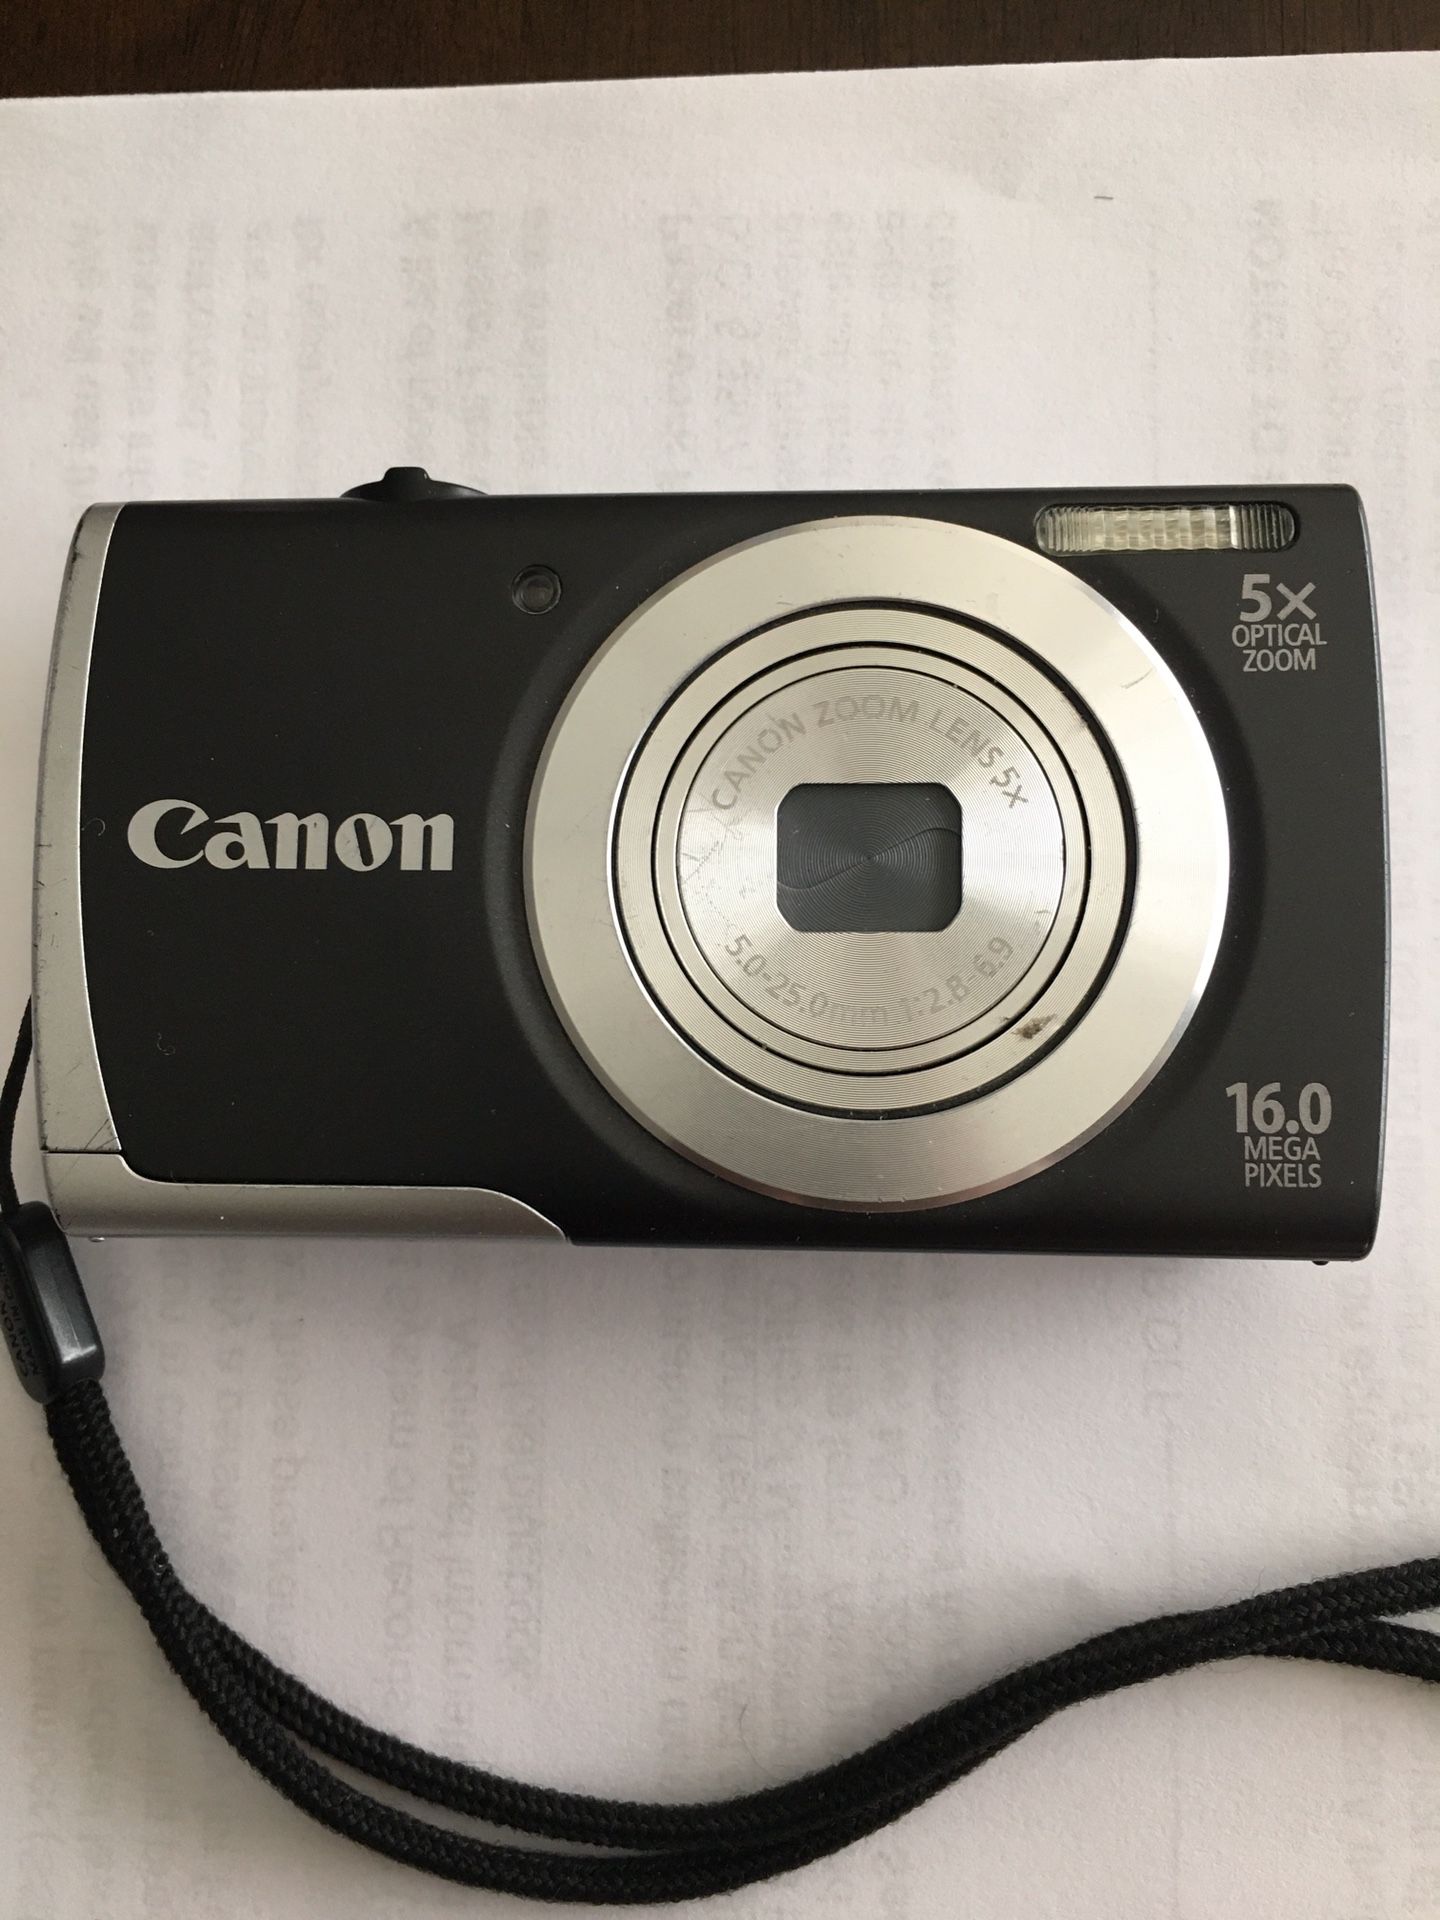 Canon PowerShot A2500 16MP Digital Camera with 5x zoom